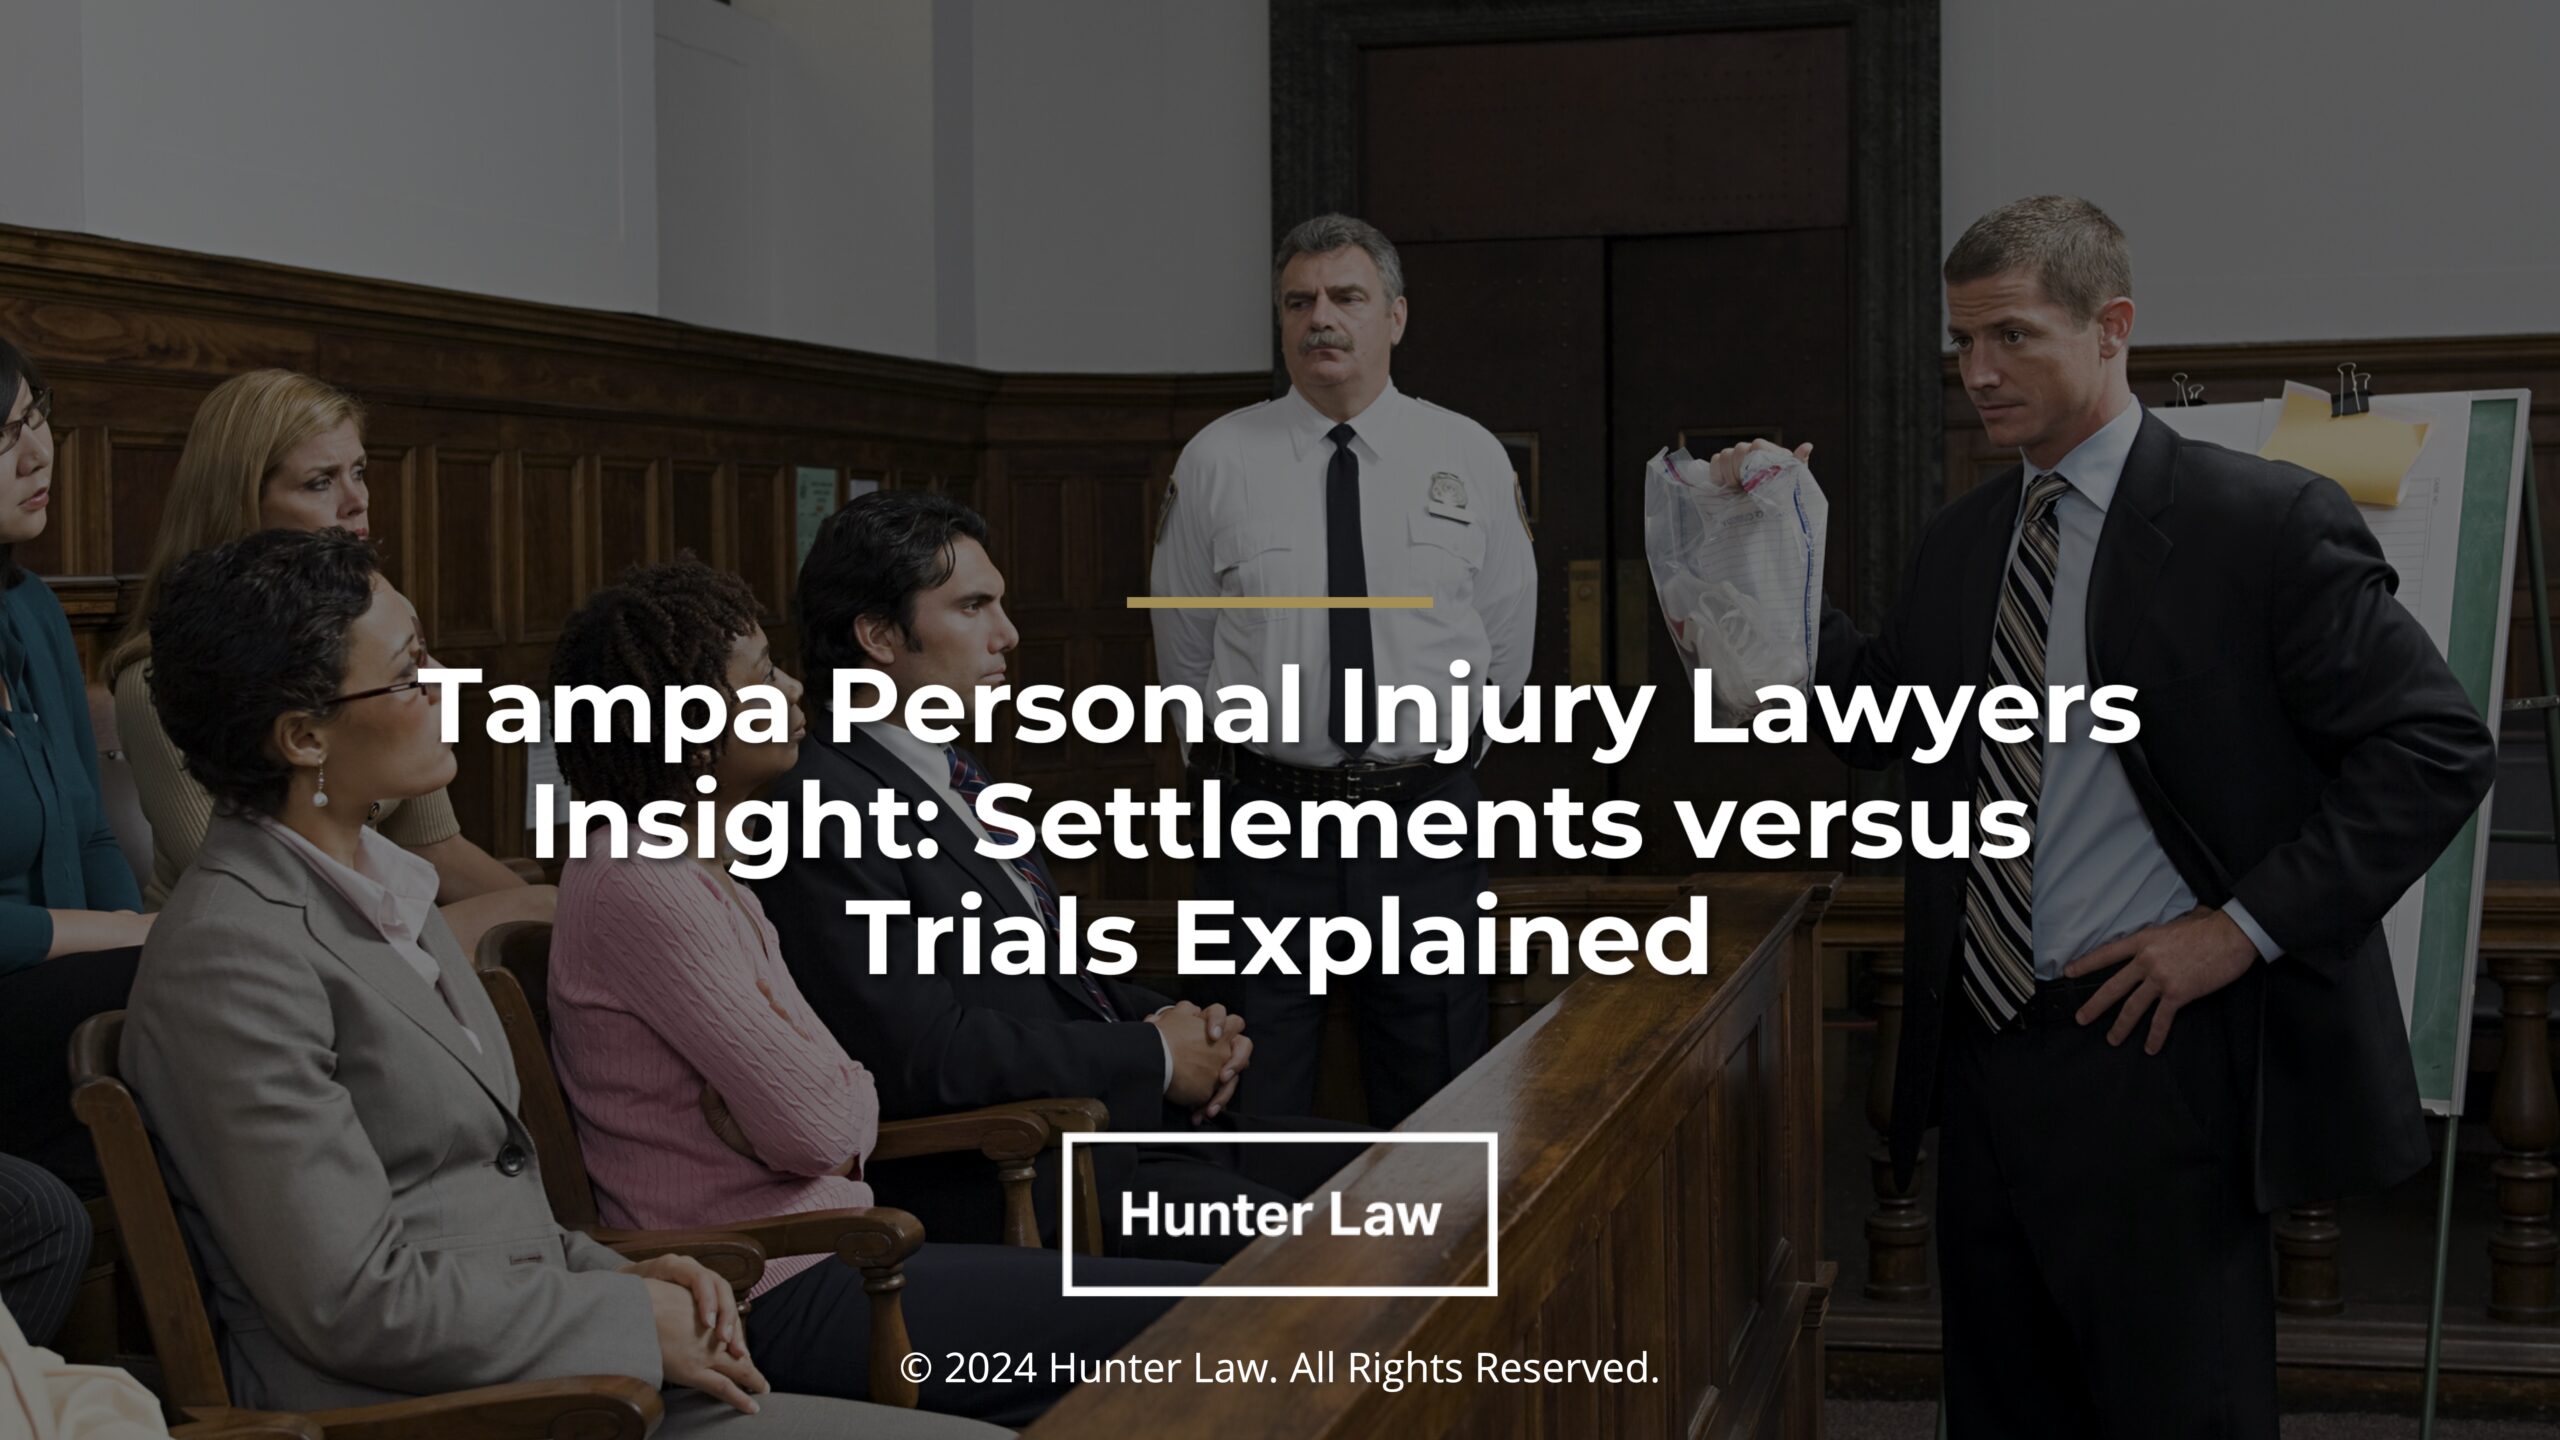 Hunter Law_Featured – Tampa Personal Injury Lawyers Insight – Settlements versus Trials Explained